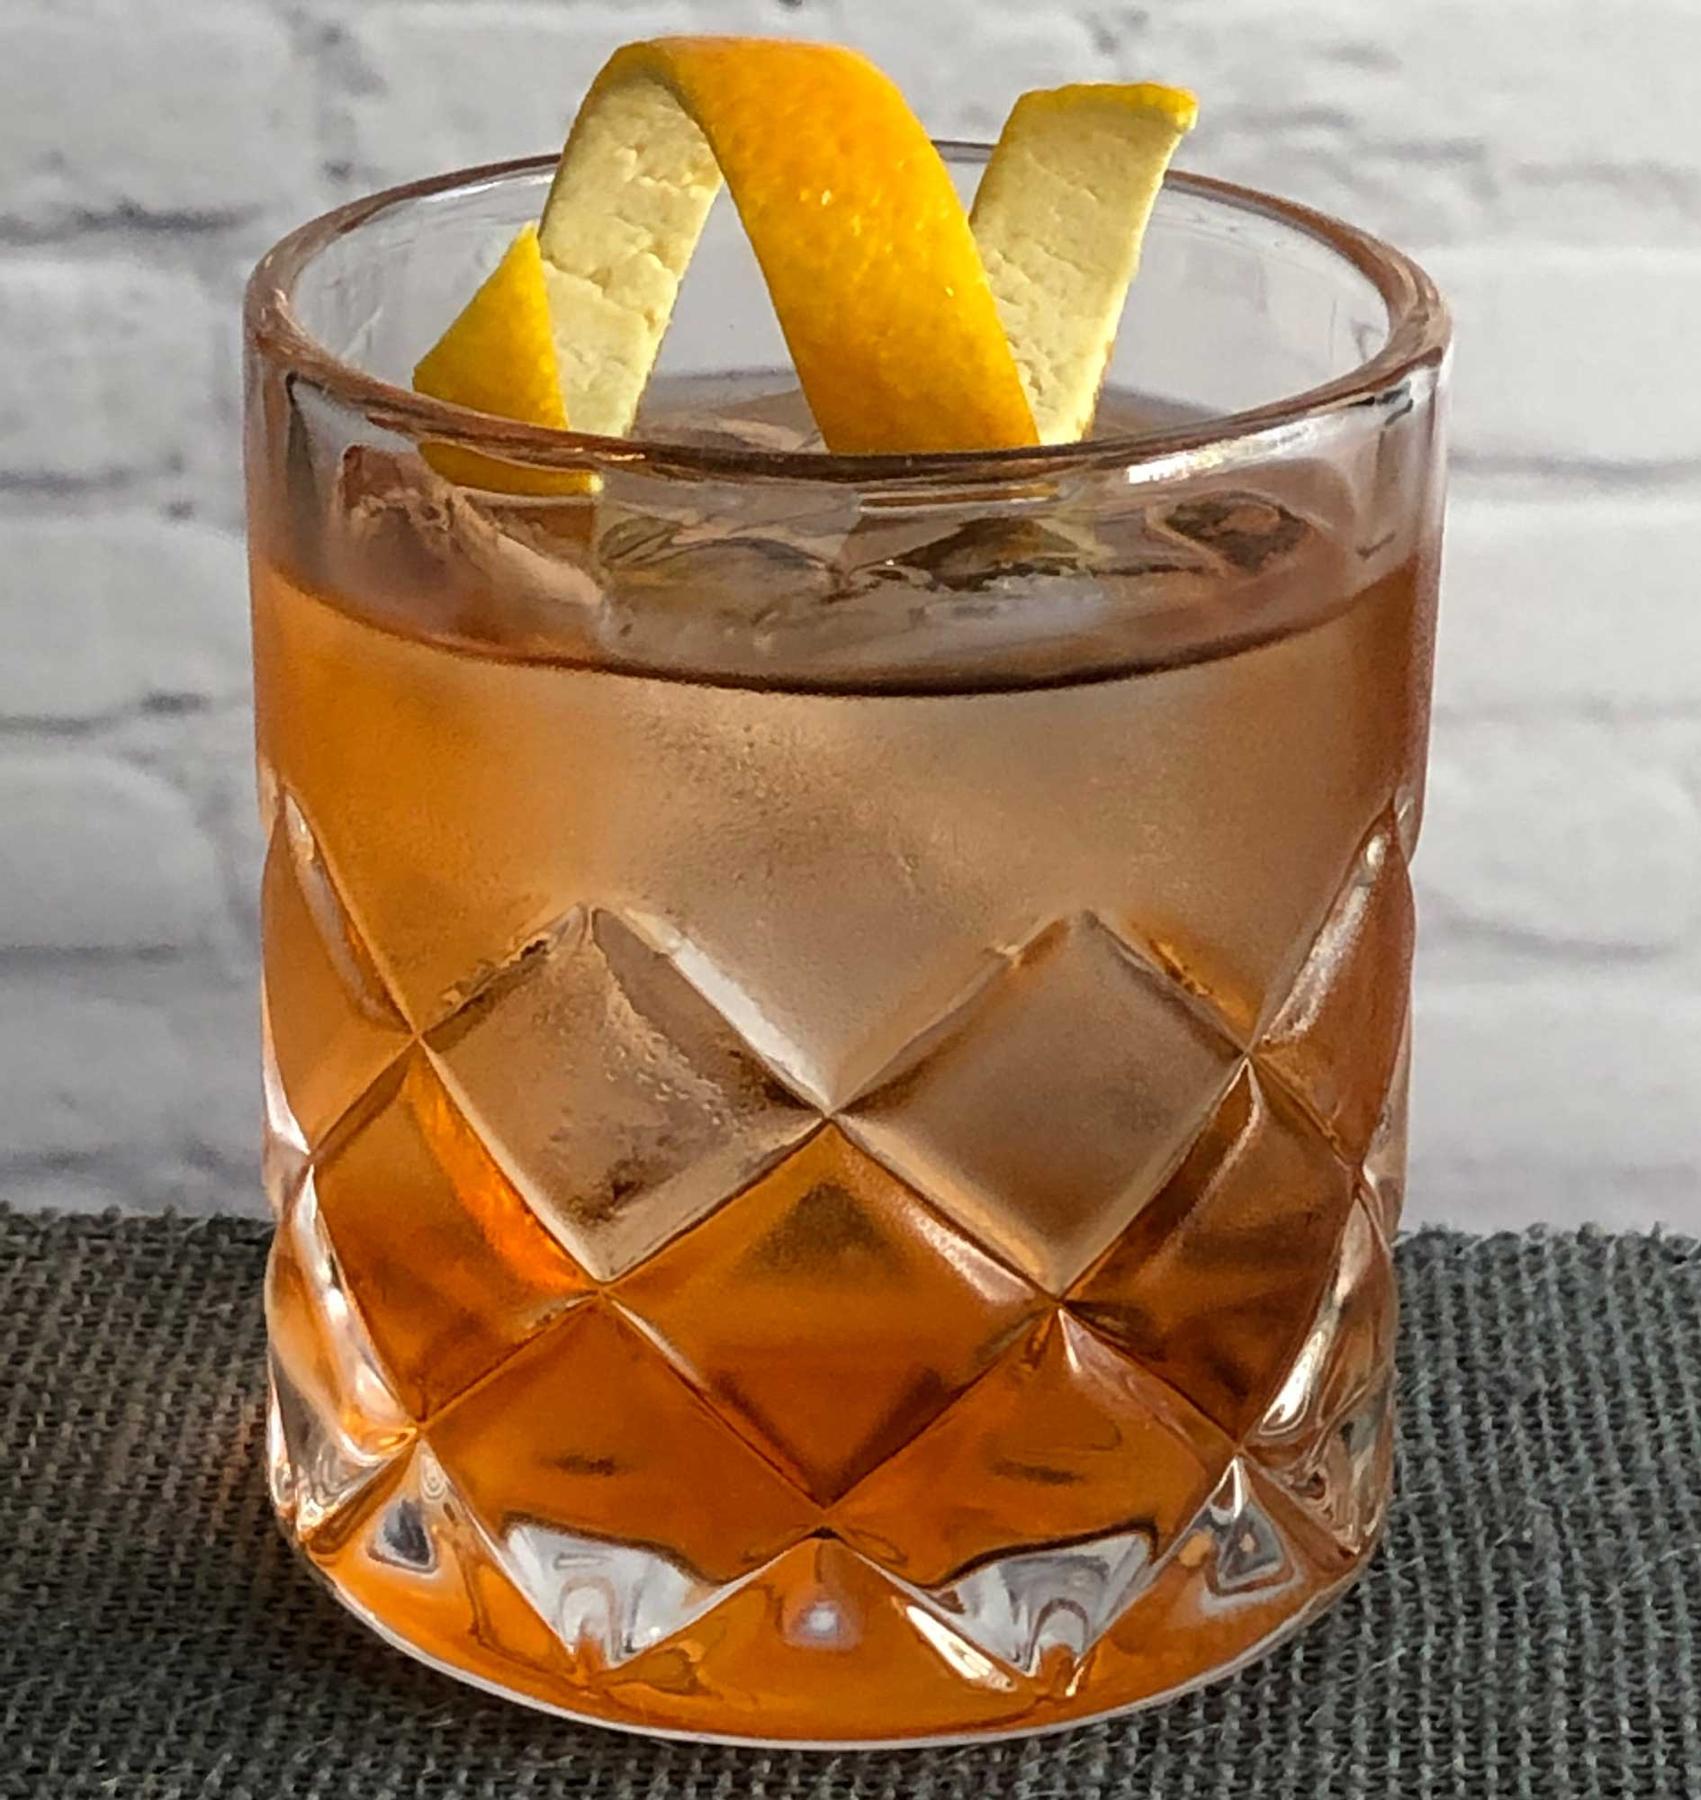 An example of the Rosita, the mixed drink (drink) featuring blanco tequila, Dolin Dry Vermouth de Chambéry, Dolin Rouge Vermouth de Chambéry, Aperitivo Cappelletti, and orange twist; photo by Lee Edwards